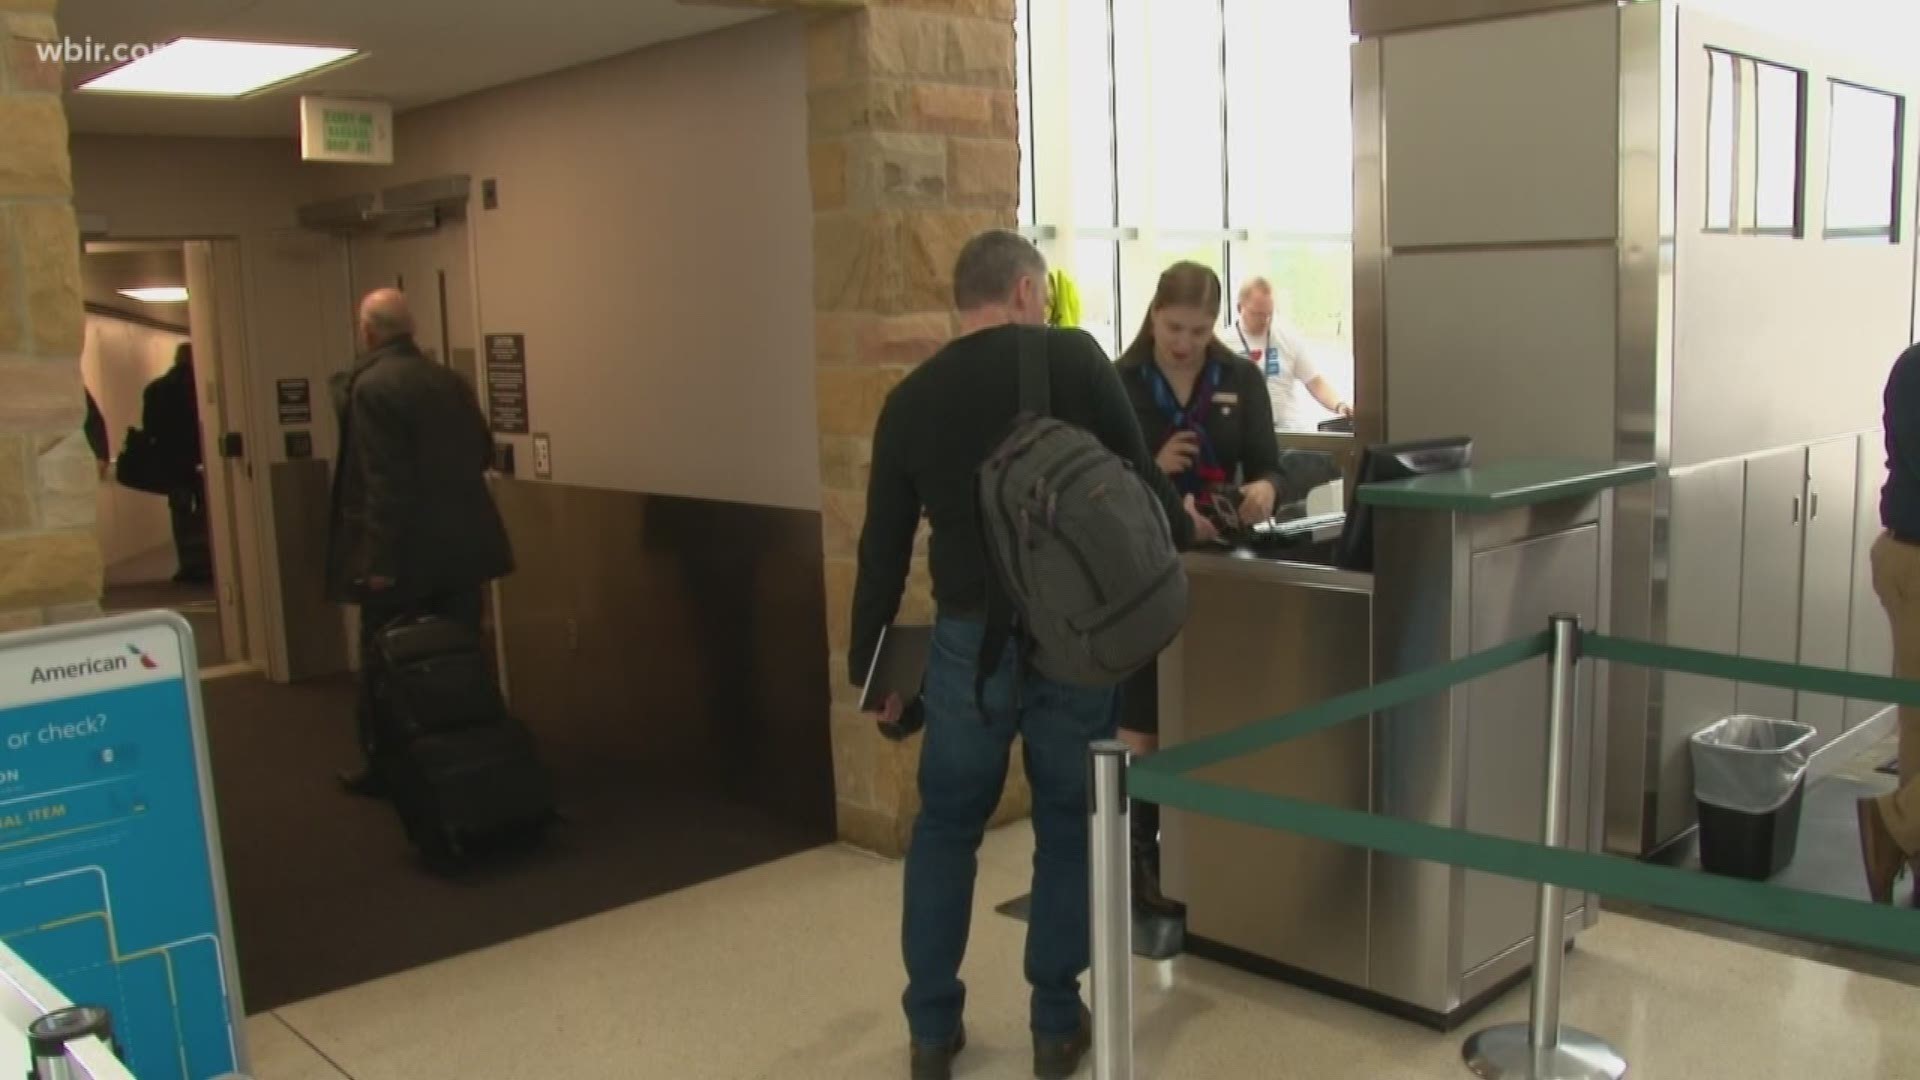 Knoxville's airport is celebrating a record number of travelers walking through its doors.